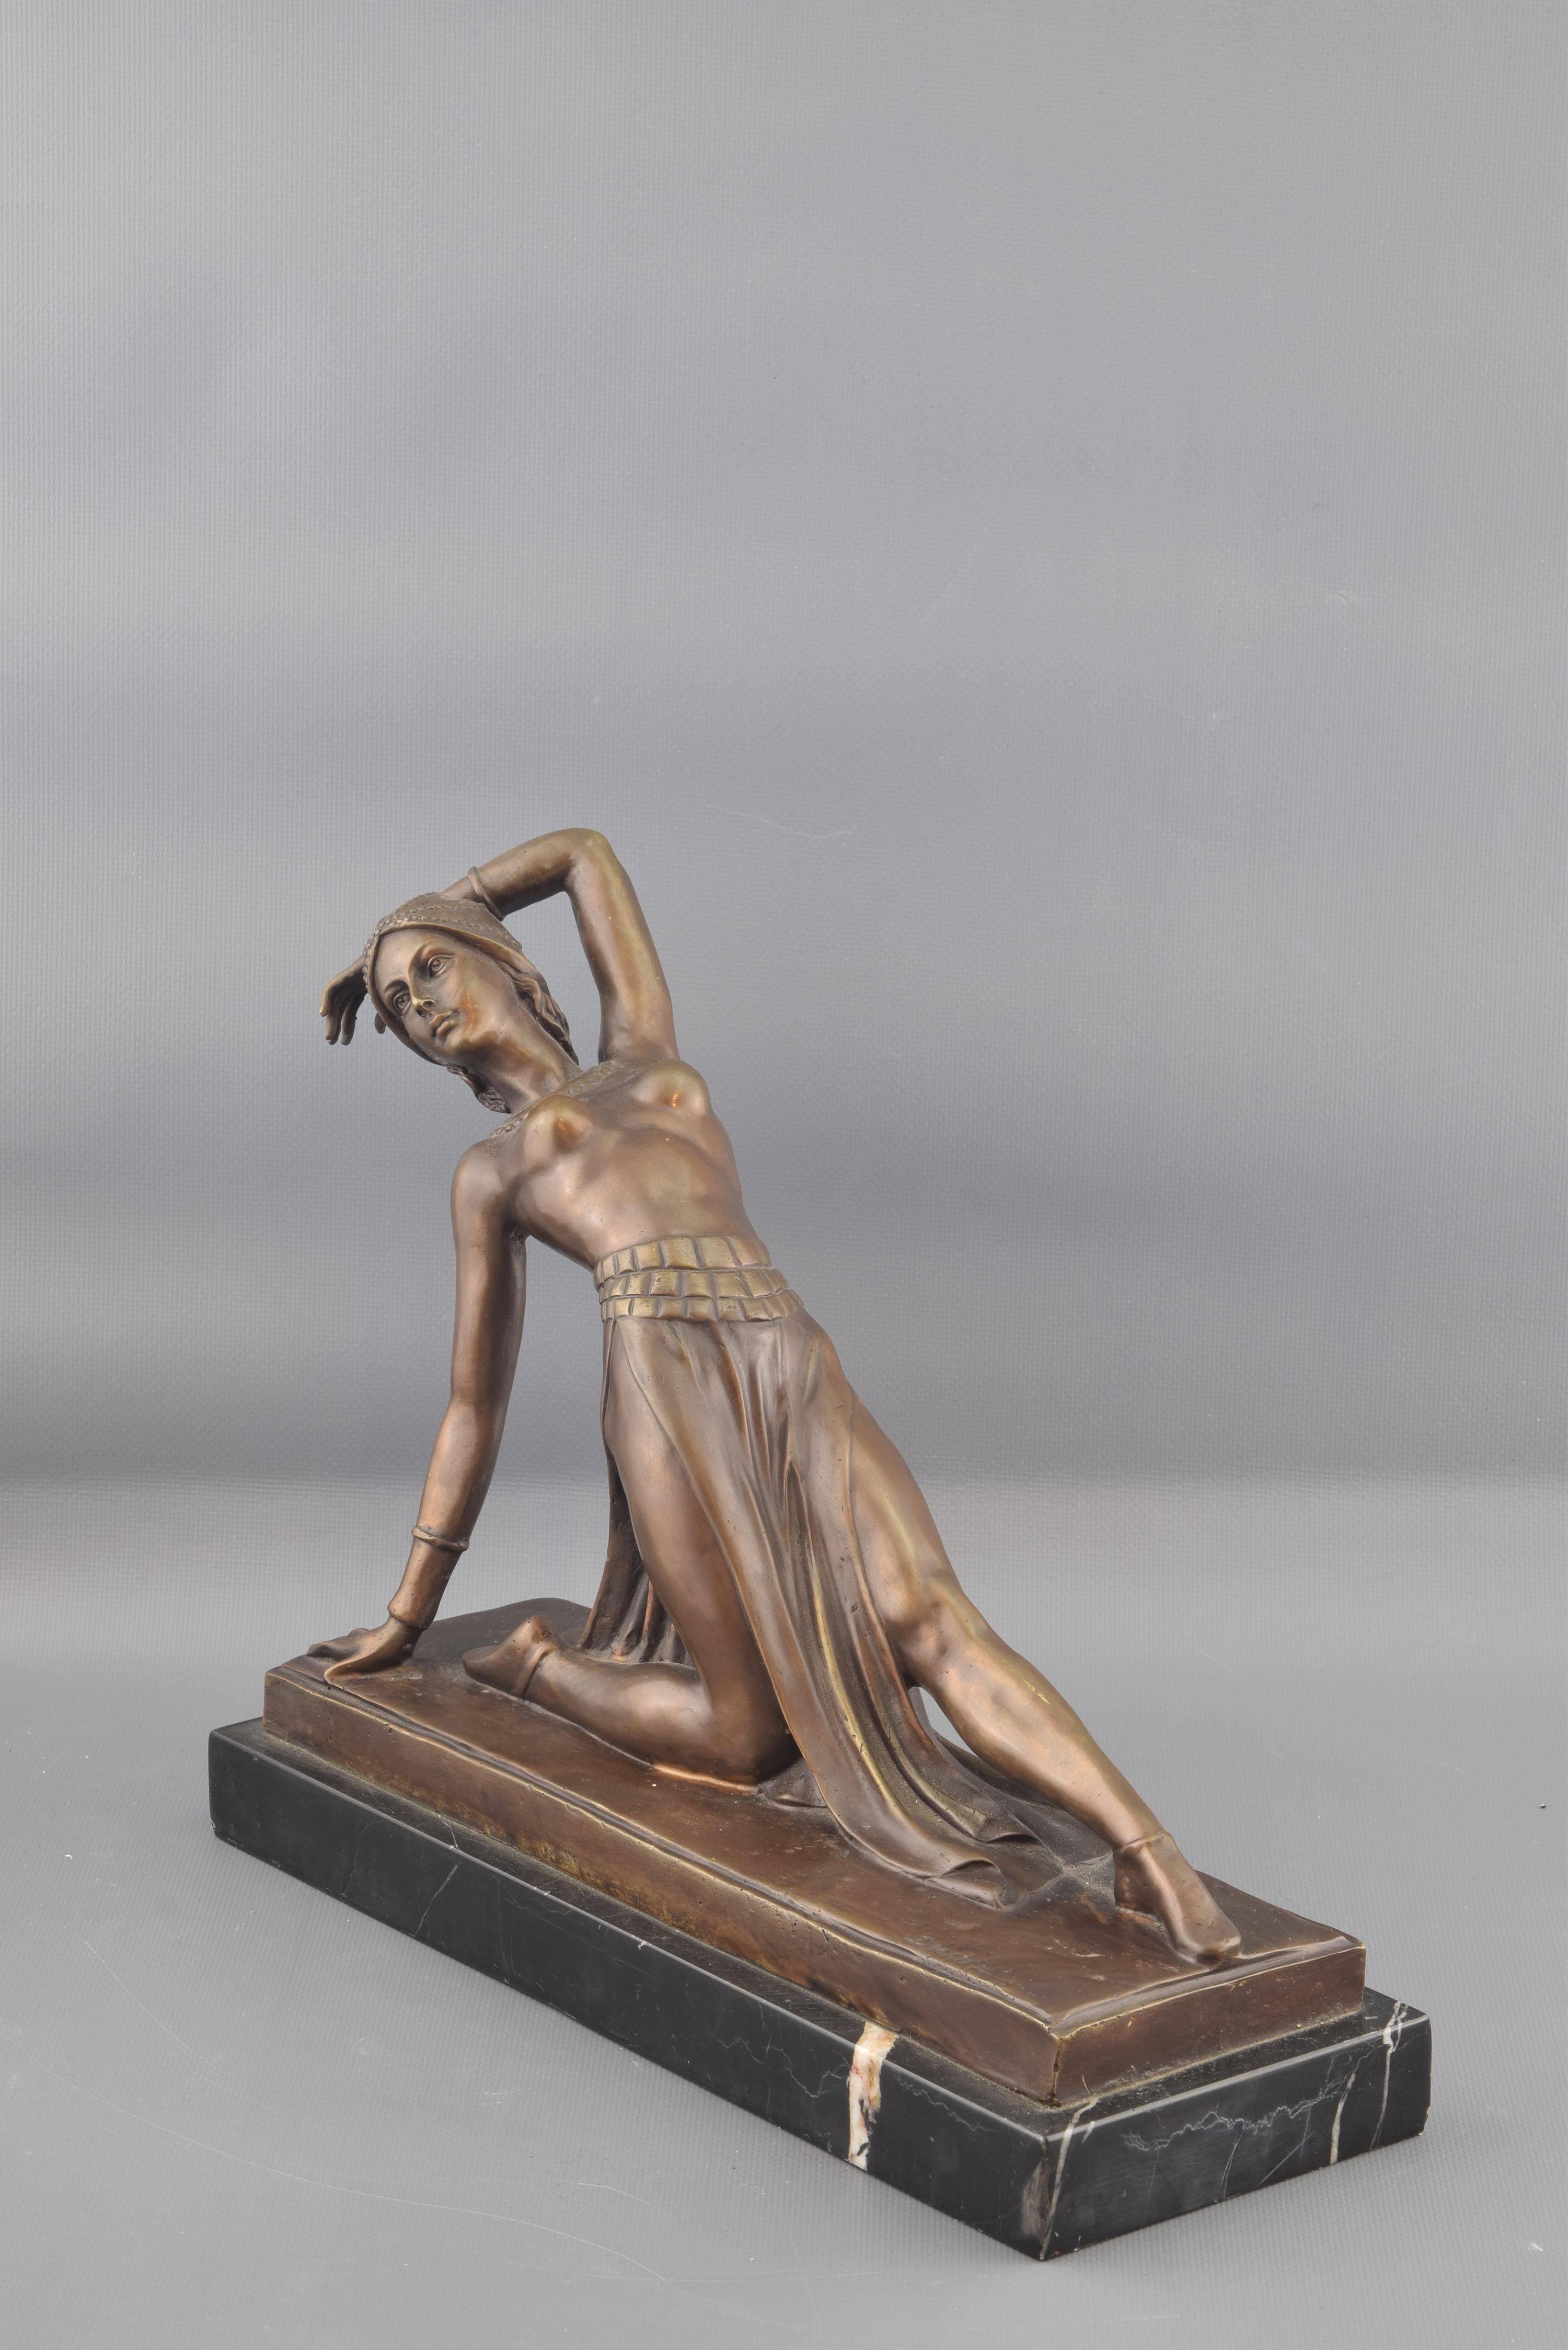 Elegant bronze sculpture following the models of DH Chiparus
Ballerina posing backwards half-naked in the oriental manner